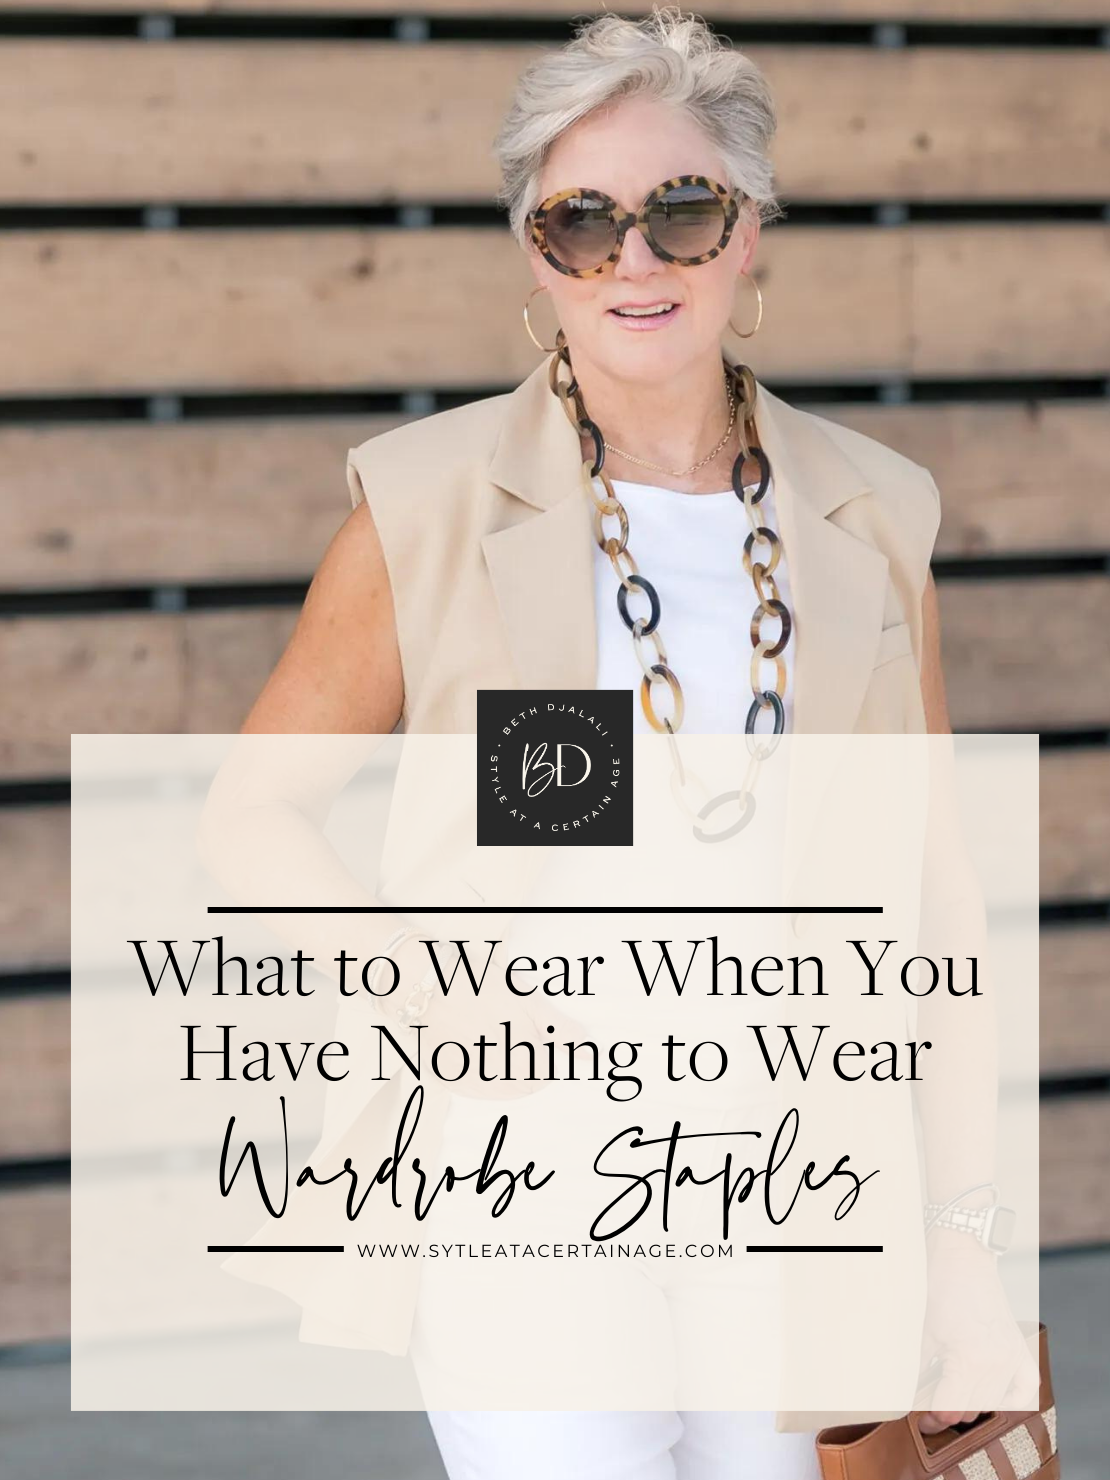 What to Wear When You Have Nothing to Wear